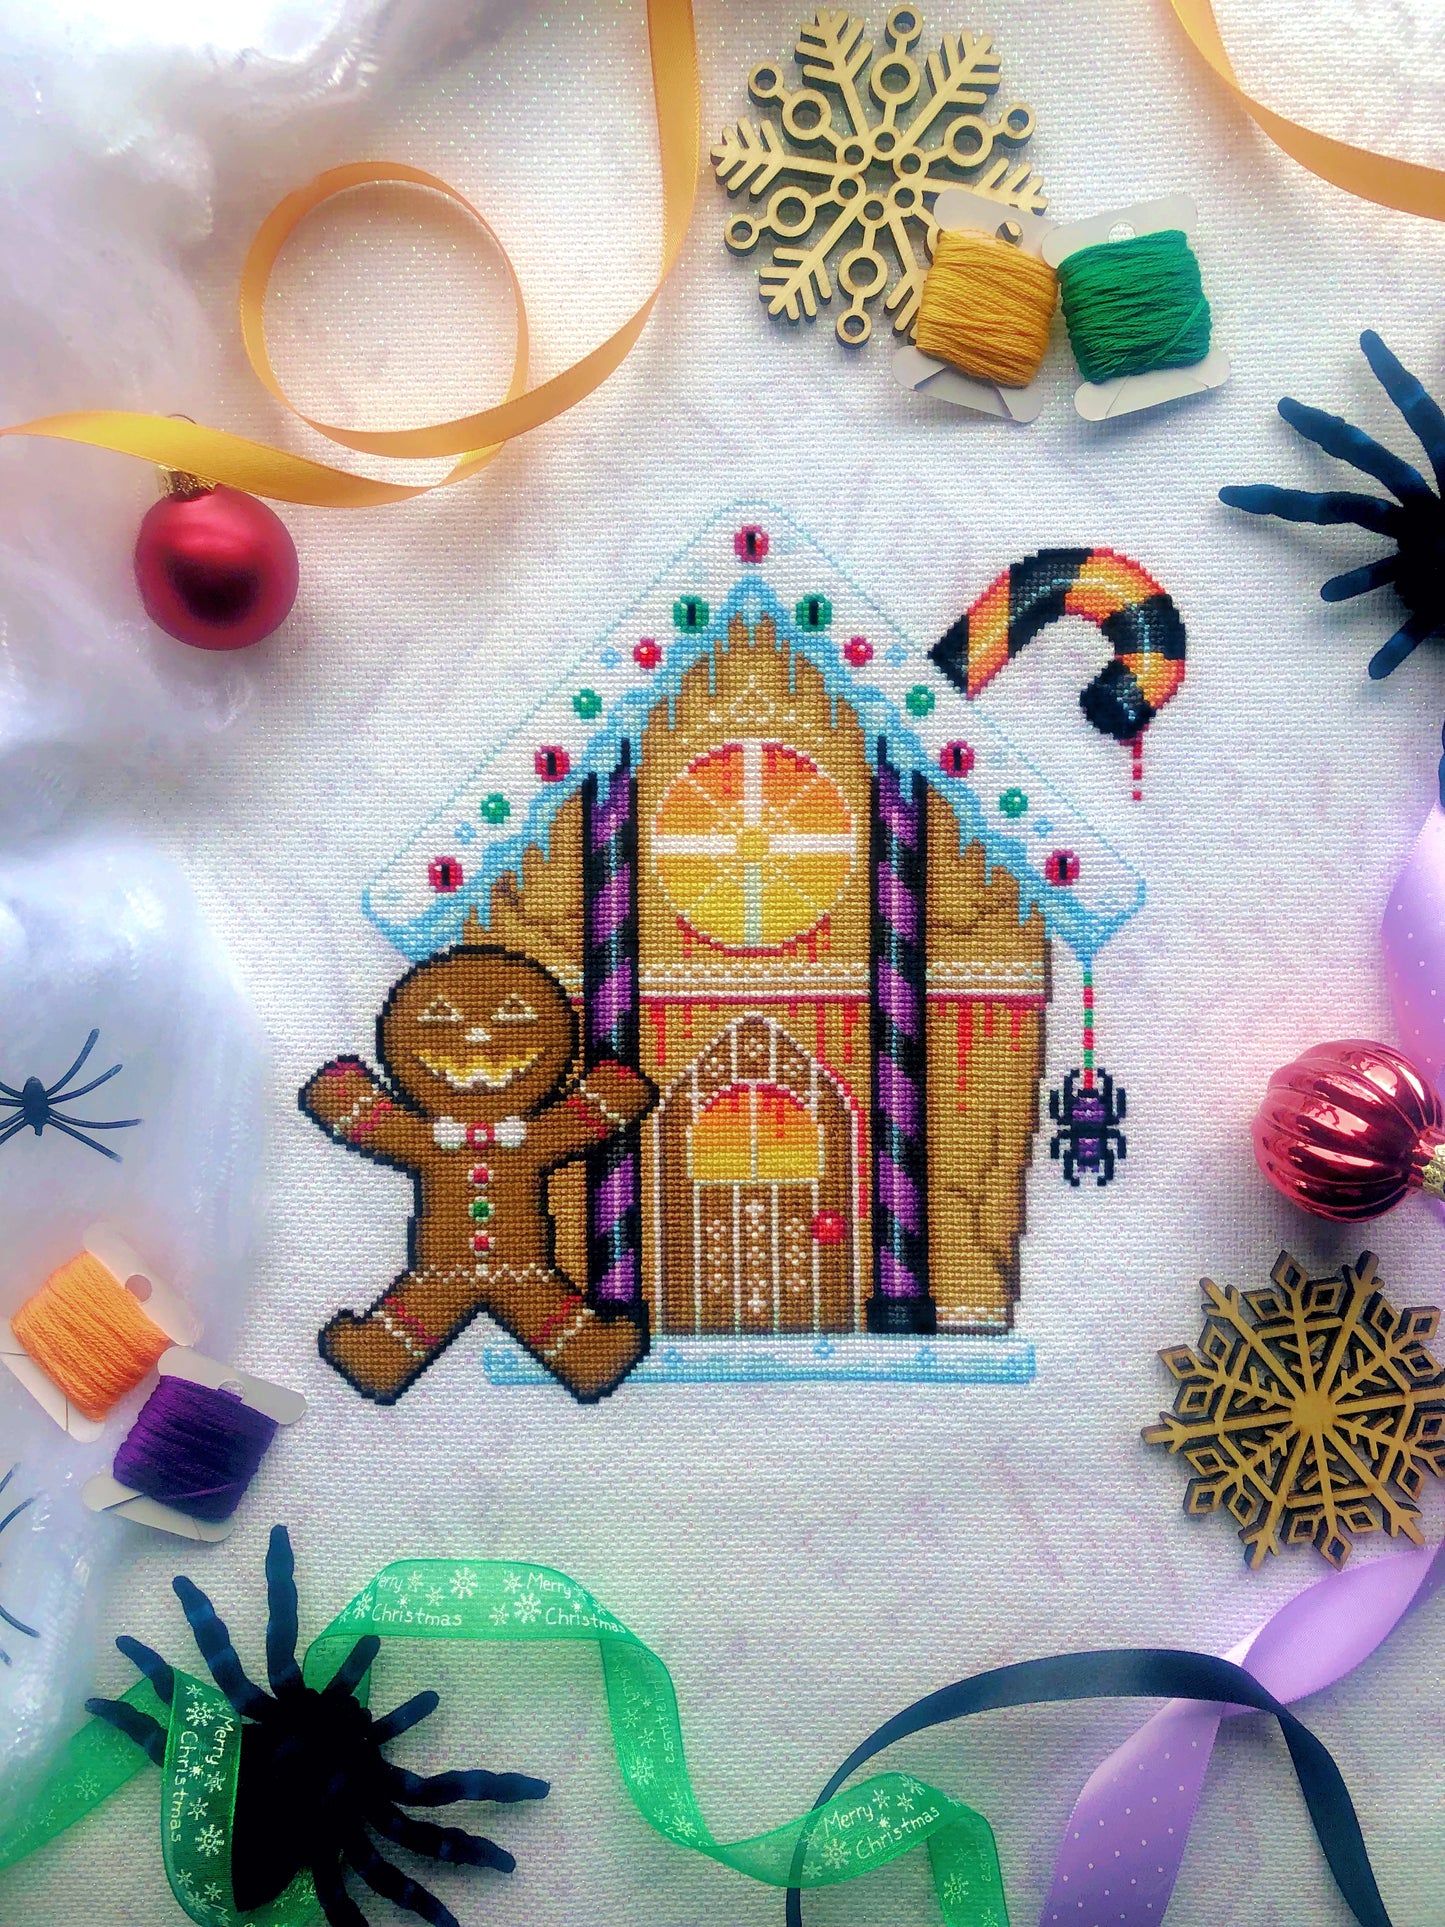 Flat-lay of Cookies & Scream gingerbread house cross stitch pattern. Finished piece is of medium size. Colors are yellow, brown, orange, purple, black and white. Gingerbread man is standing in front of gingerbread house with a Halloween smile.